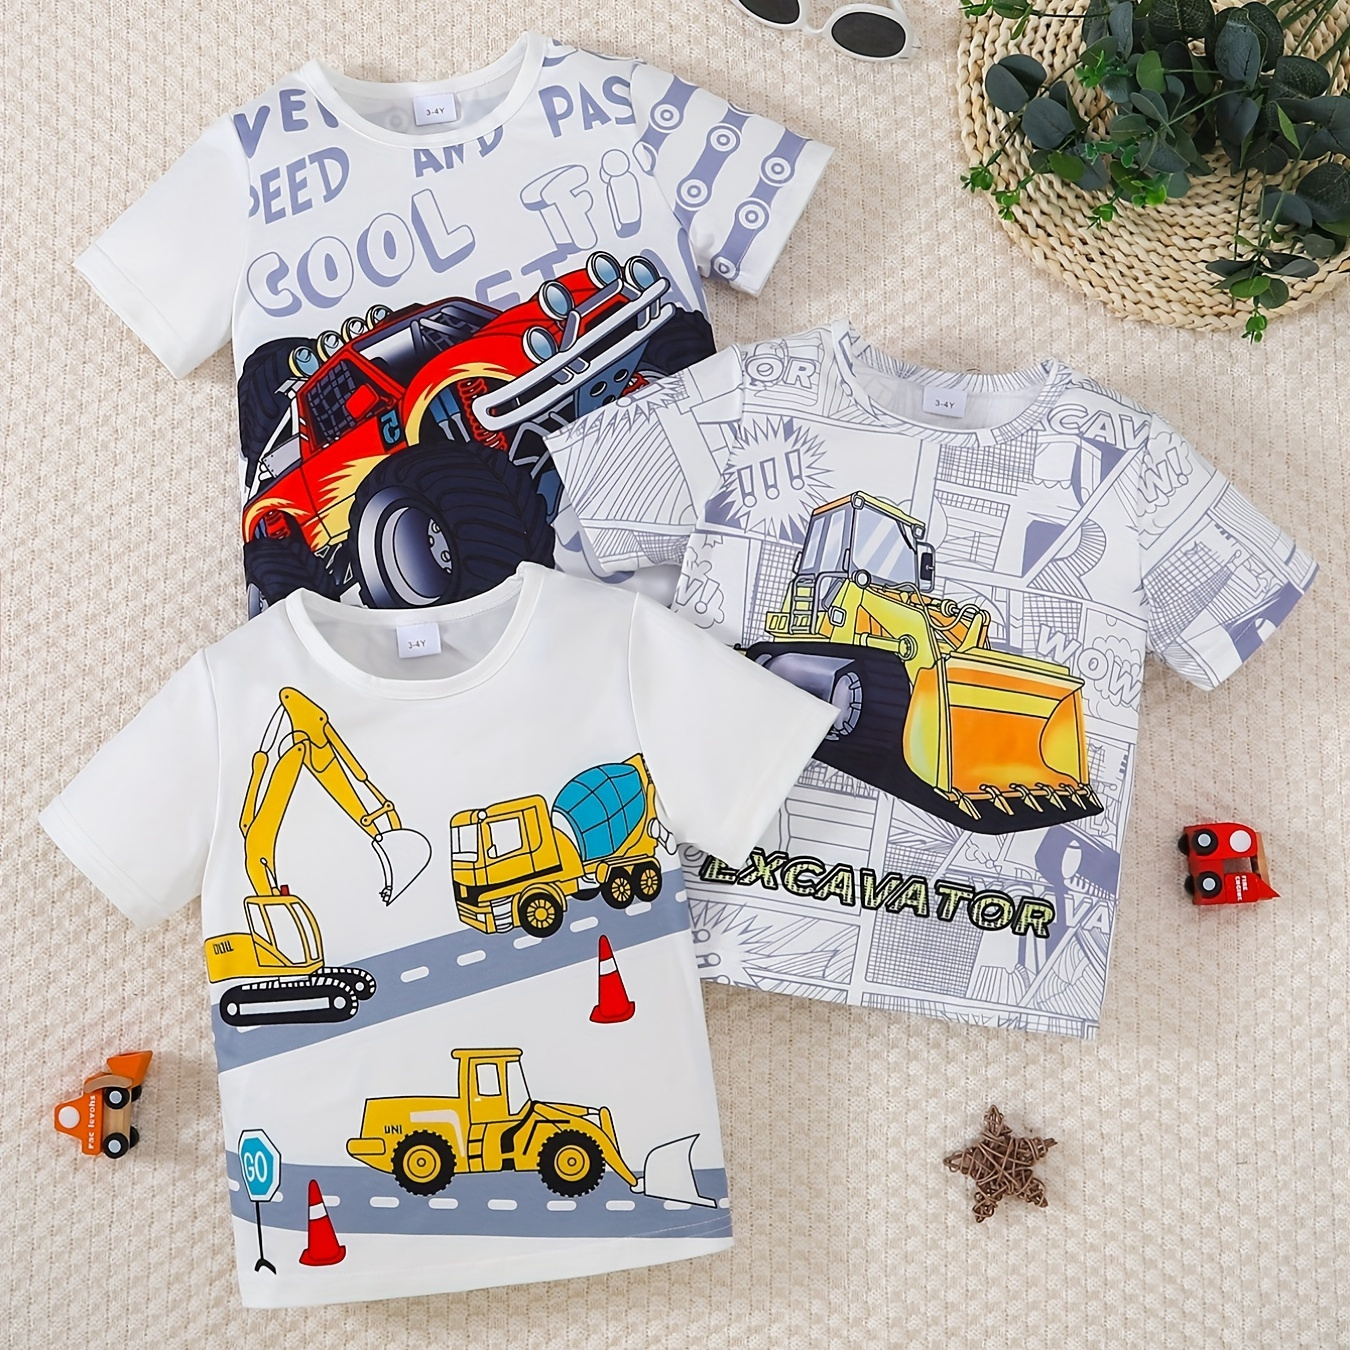 

3pcs Cartoon Cool Truck, Digger And Excavator Print Boys Creative T-shirt, Casual Lightweight Comfy Short Sleeve Crew Neck Tee Tops, Kids Clothings For Summer